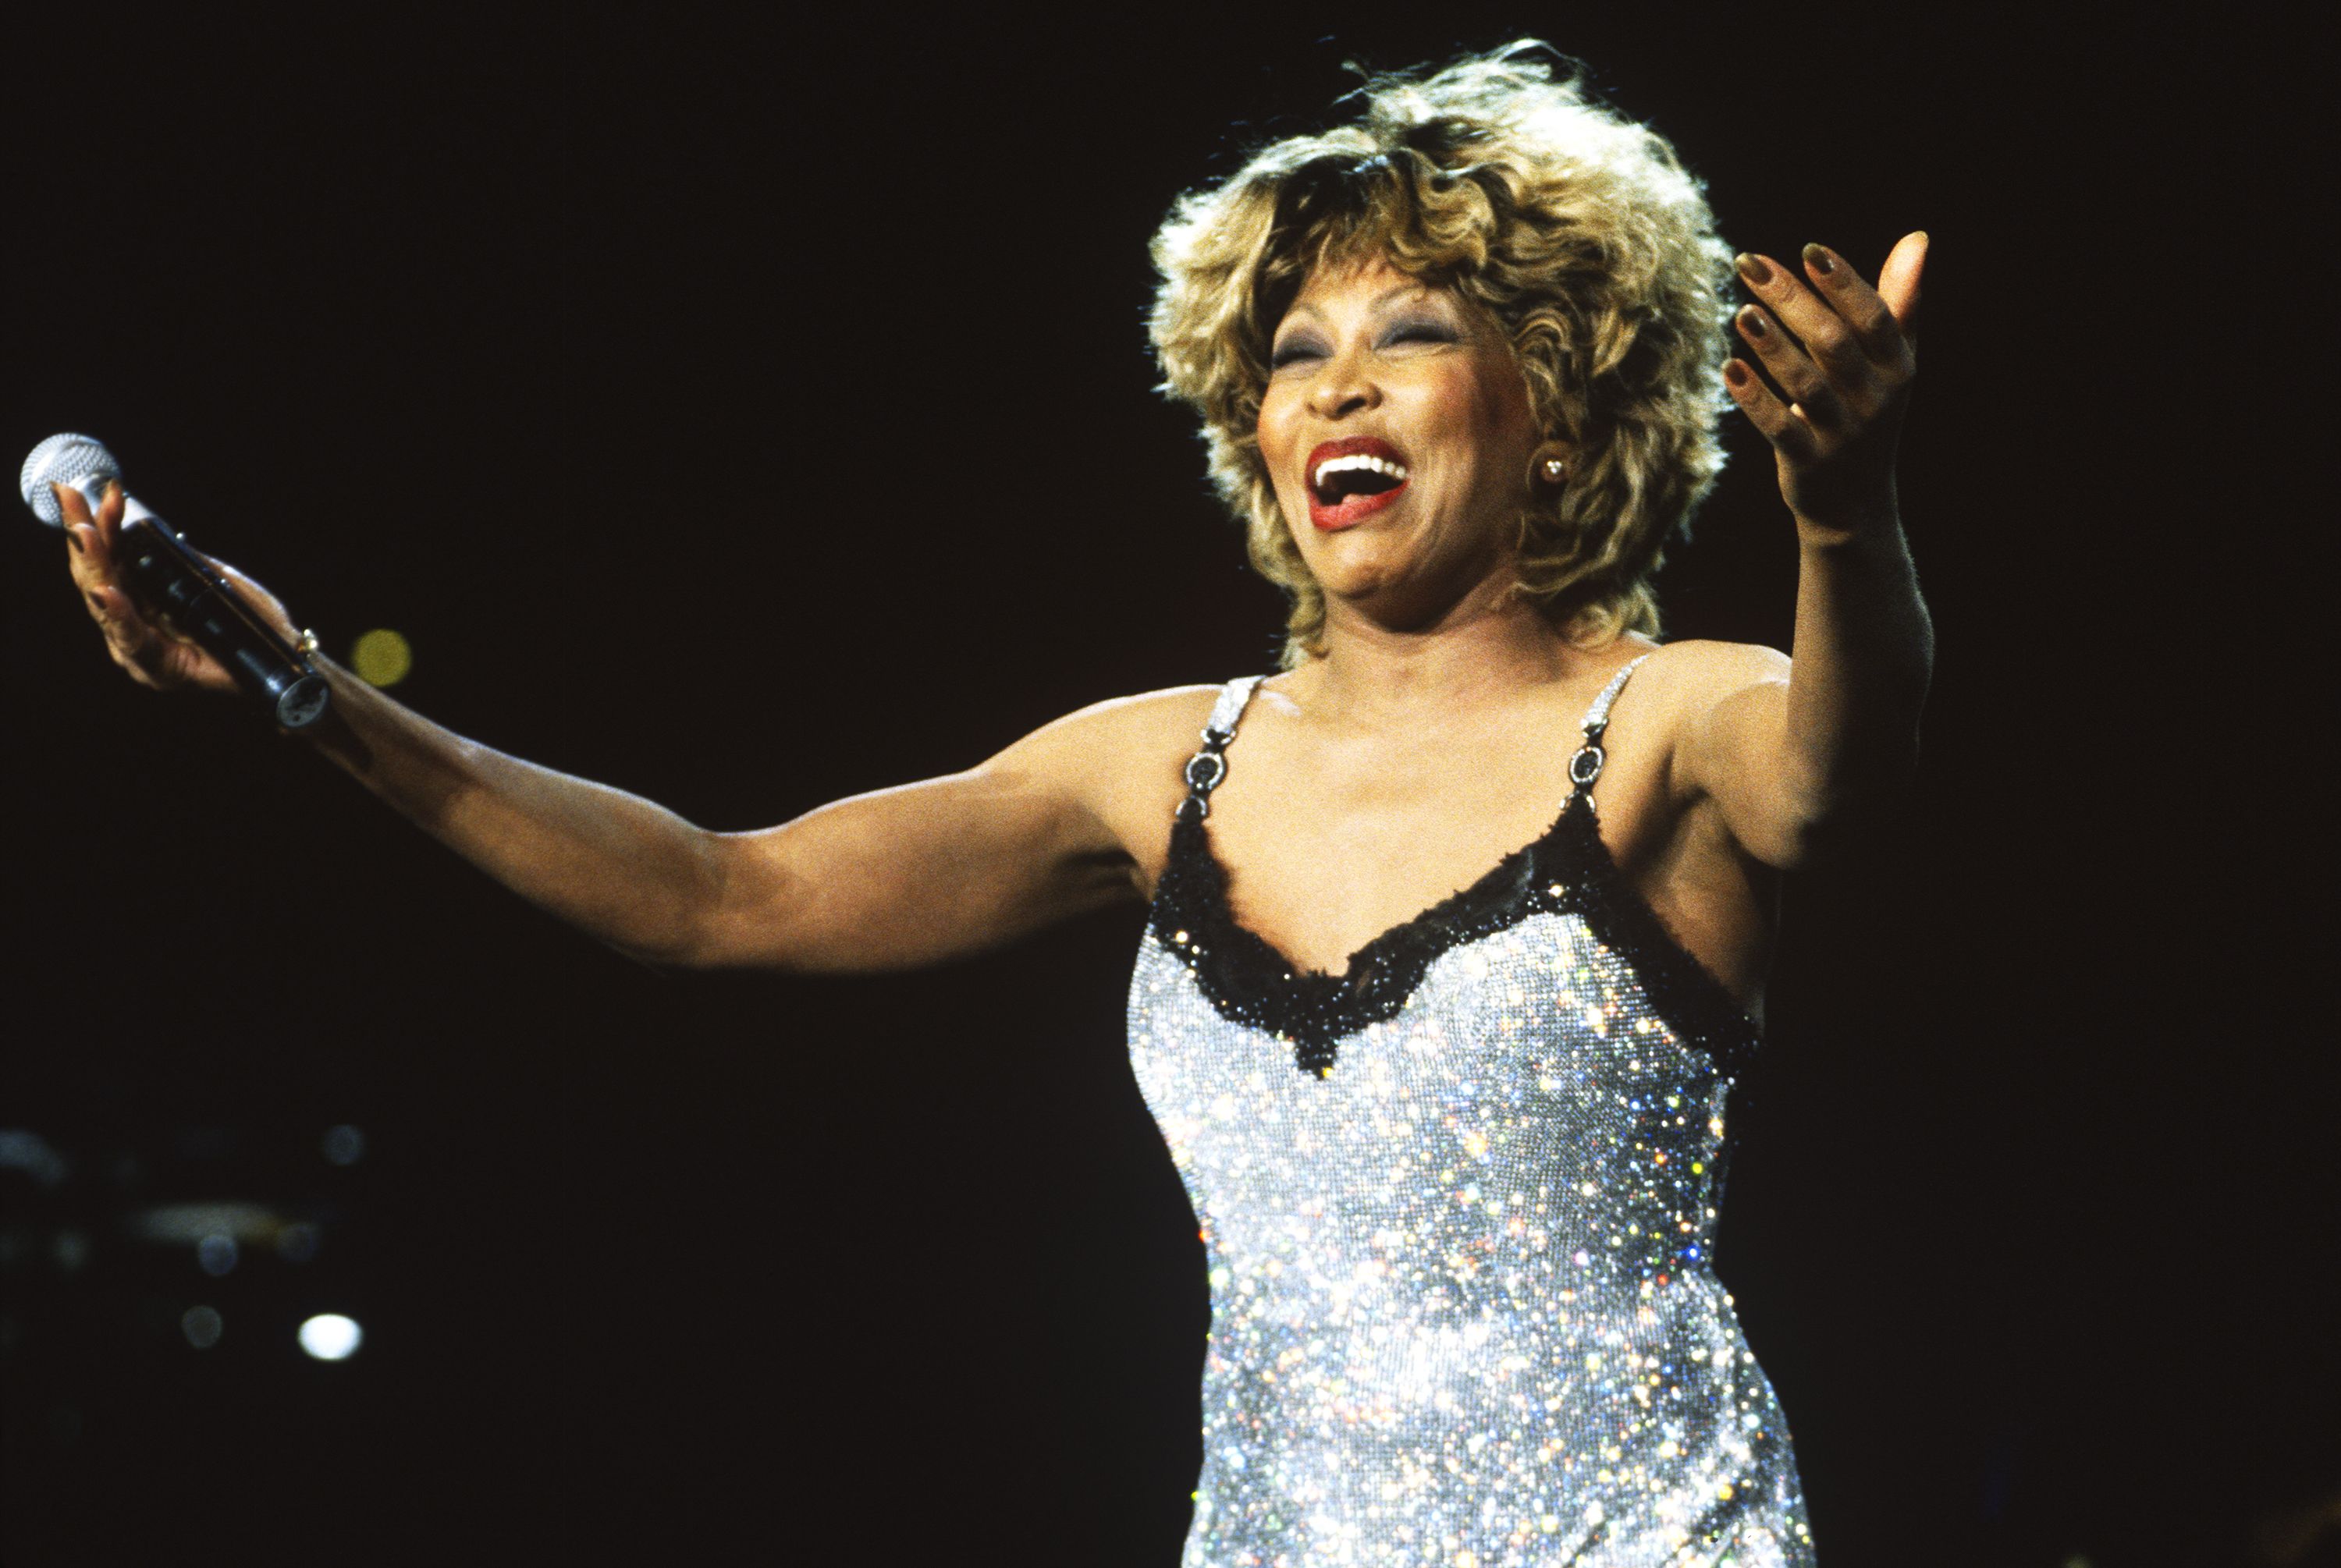 <p>Dubbed the “Queen of Rock ’n’ Roll,” Tina Turner had a prolific career as a singer, songwriter, and actress that spanned more than 50 years. She retired in 2009 and in 2013, after living in Switzerland for 20 years, she gave up her American citizenship and became a naturalized citizen of Switzerland.</p><p> <br><b>Related:</b> <a href="https://blog.cheapism.com/actors-who-played-stars/">26 Actors Who Absolutely Nailed the Icons They Portrayed</a></p>